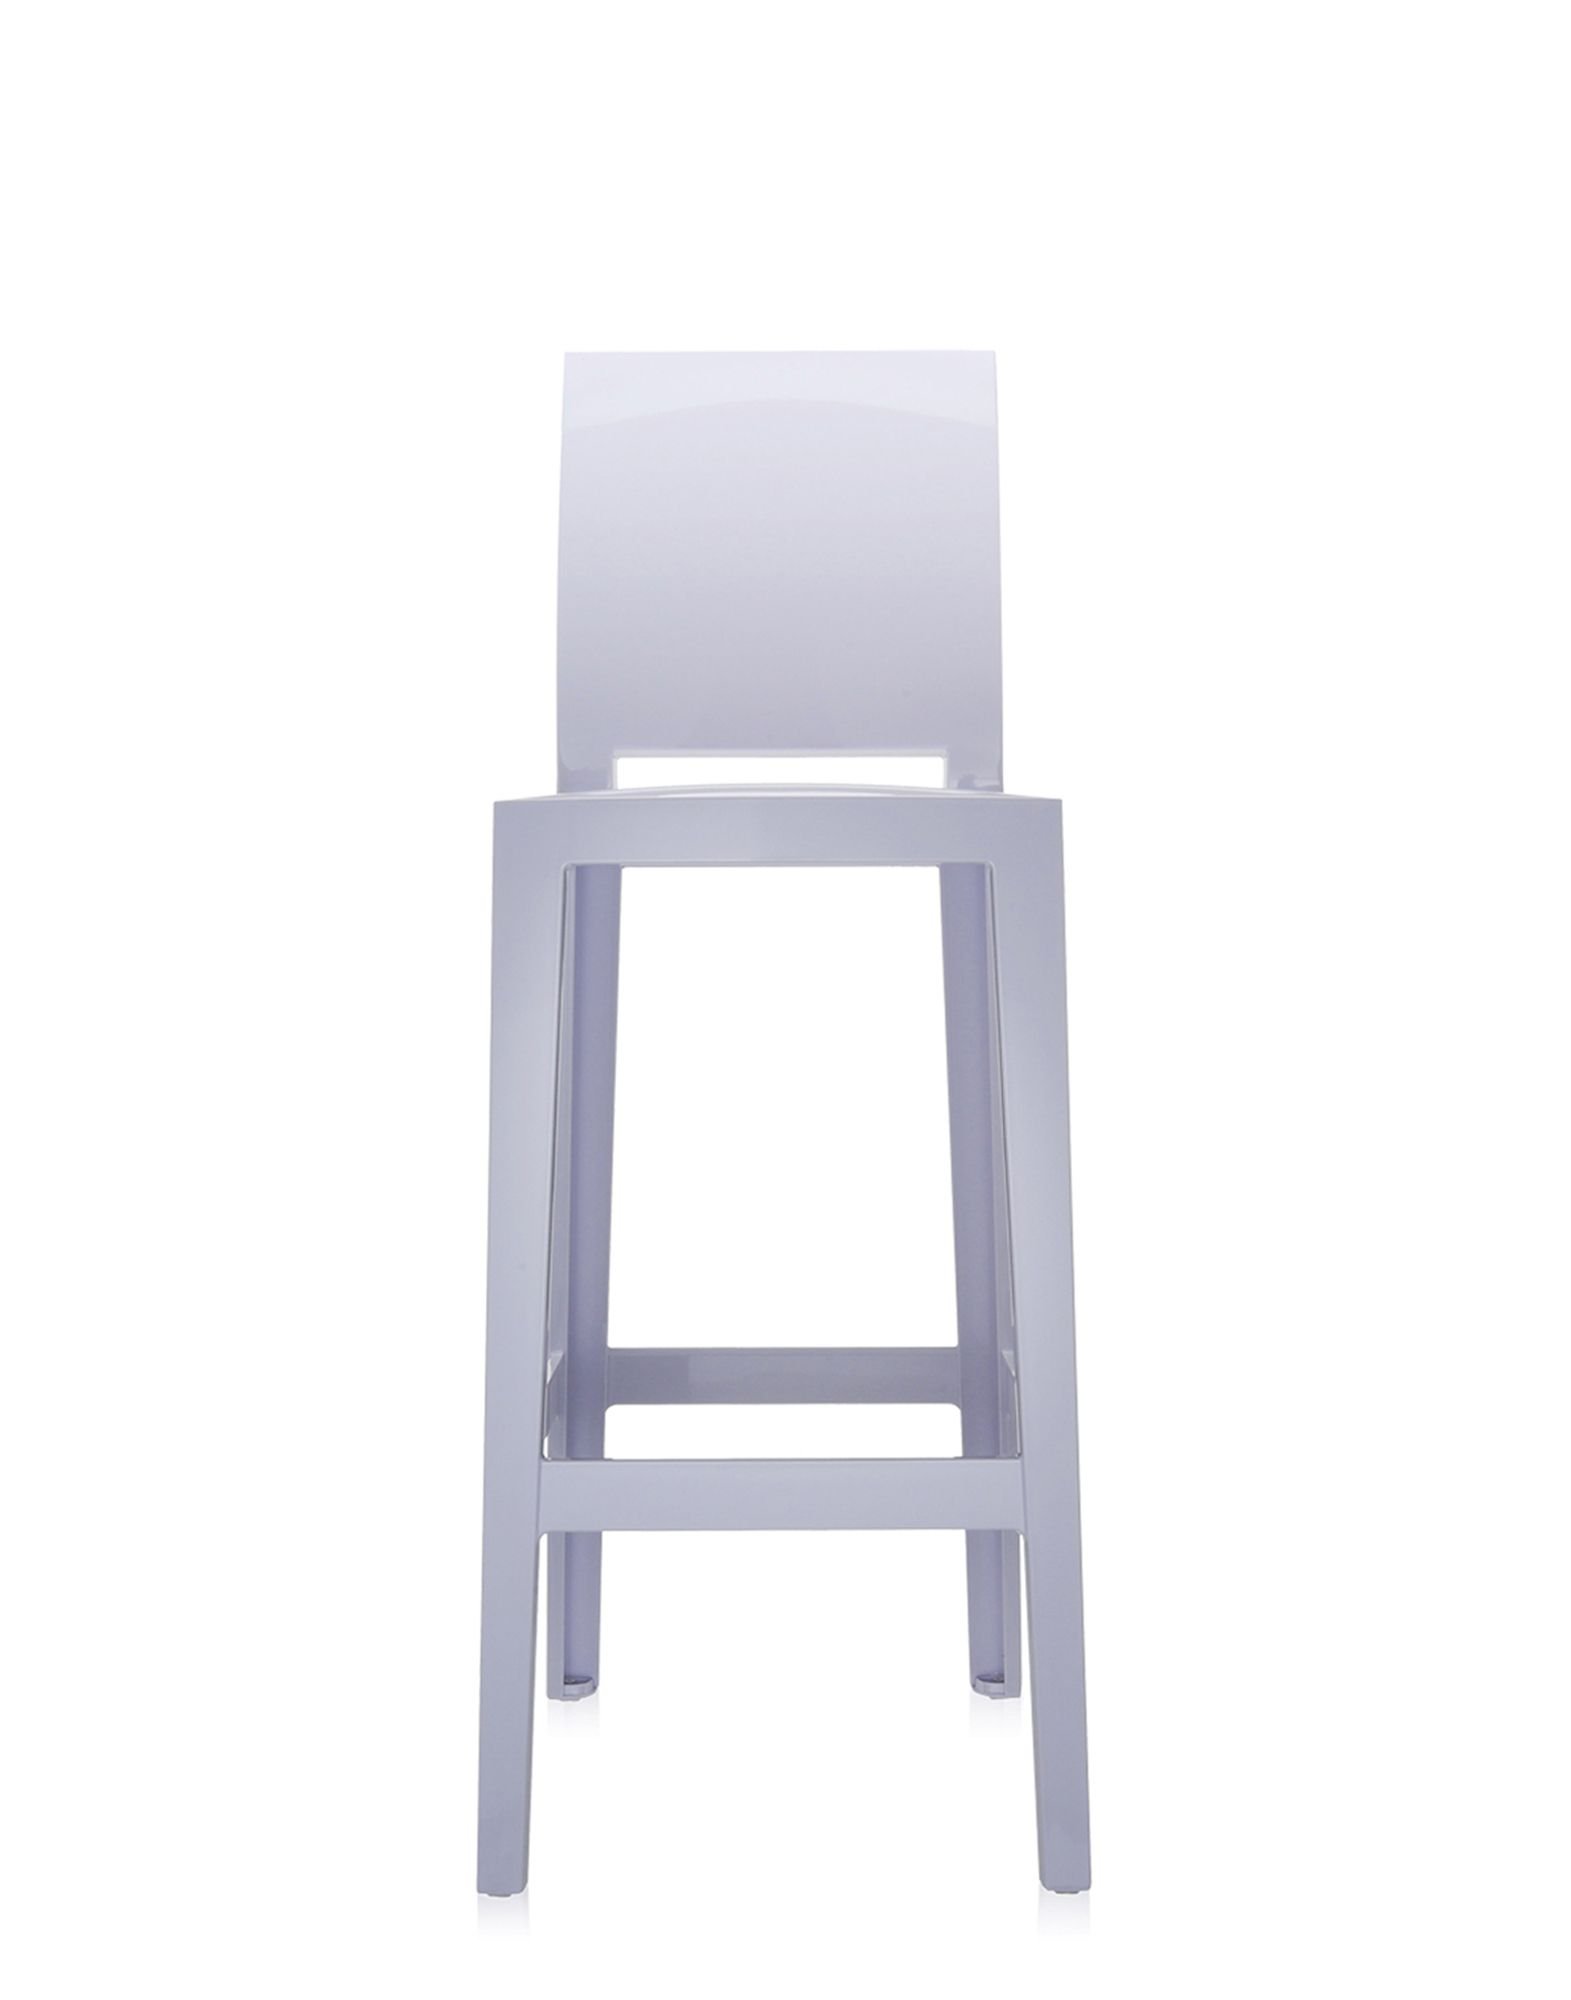 One More Please Stool from Kartell, designed by Philippe Starck